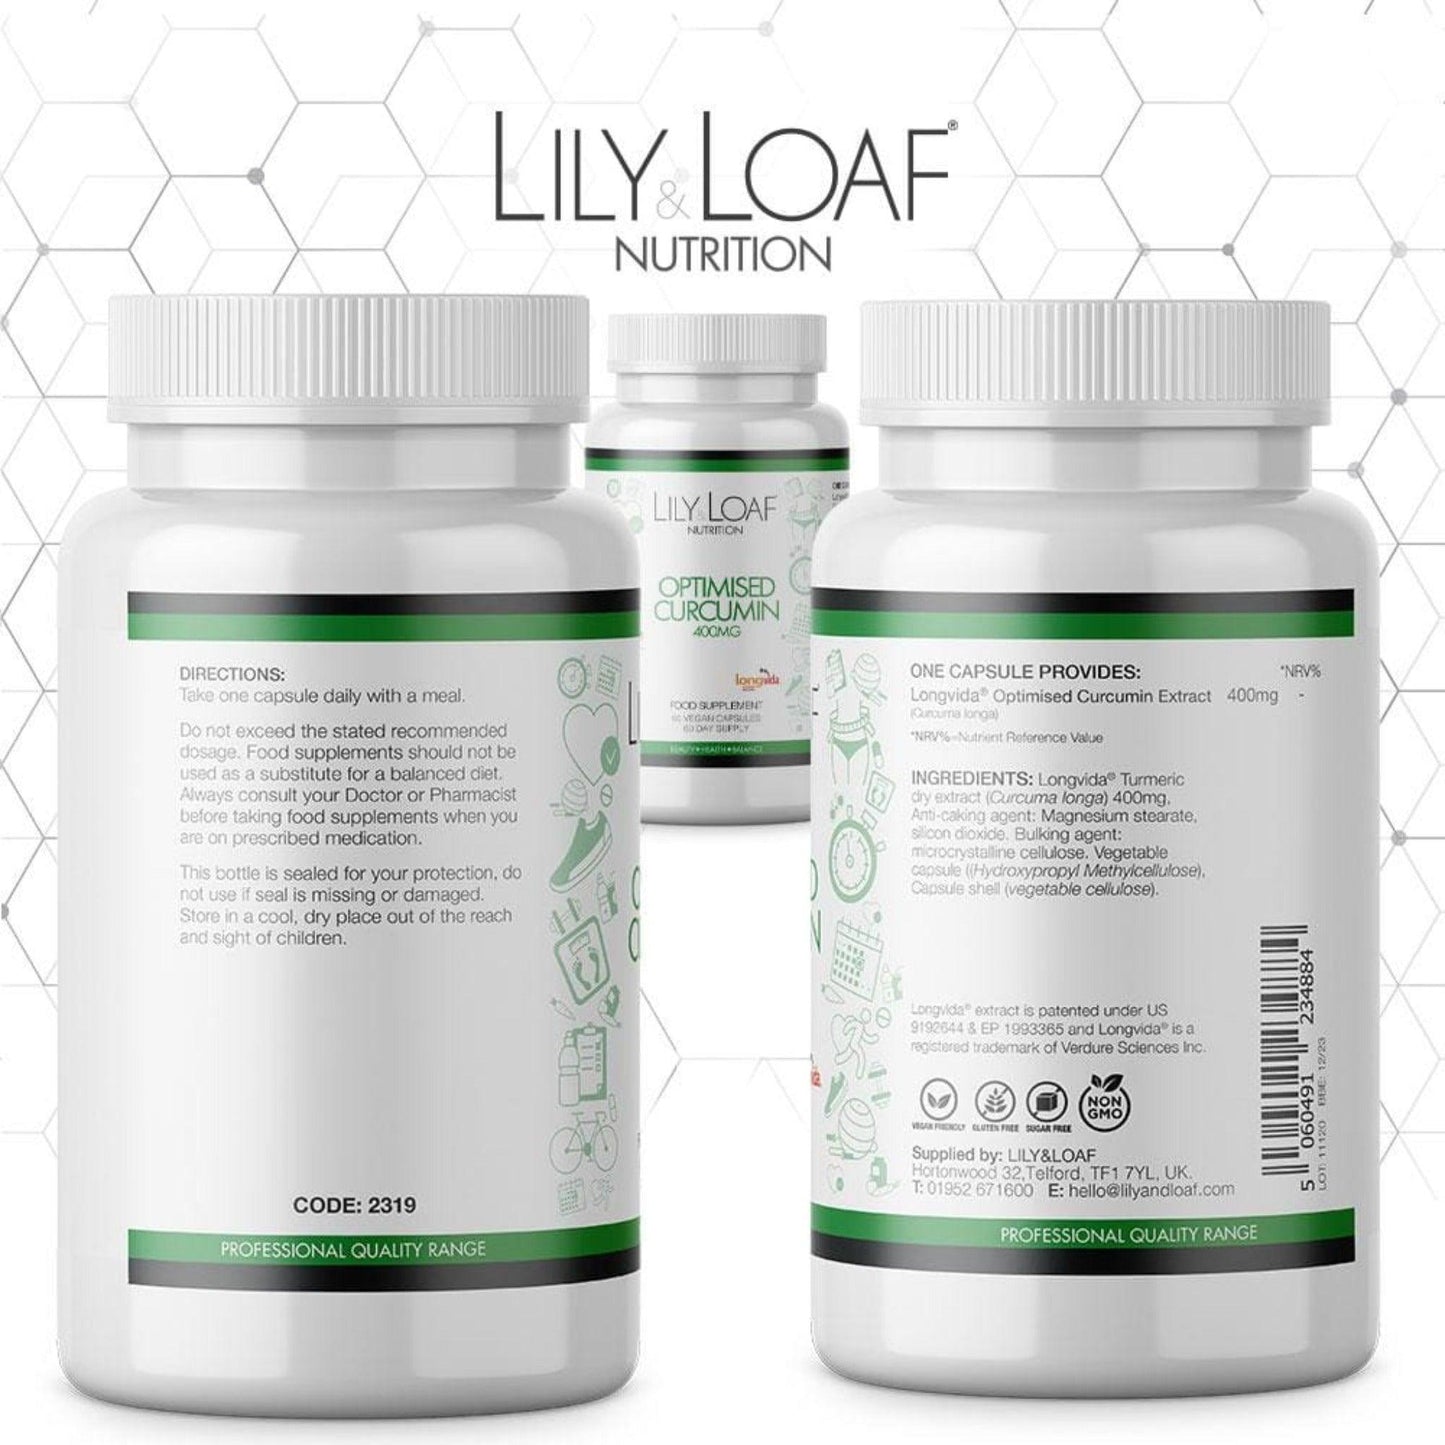 White bottle of Lily & Loaf Optimised Curcumin supplement, containing 60 vegan capsules for a 60-day supply, featuring Longvida technology.